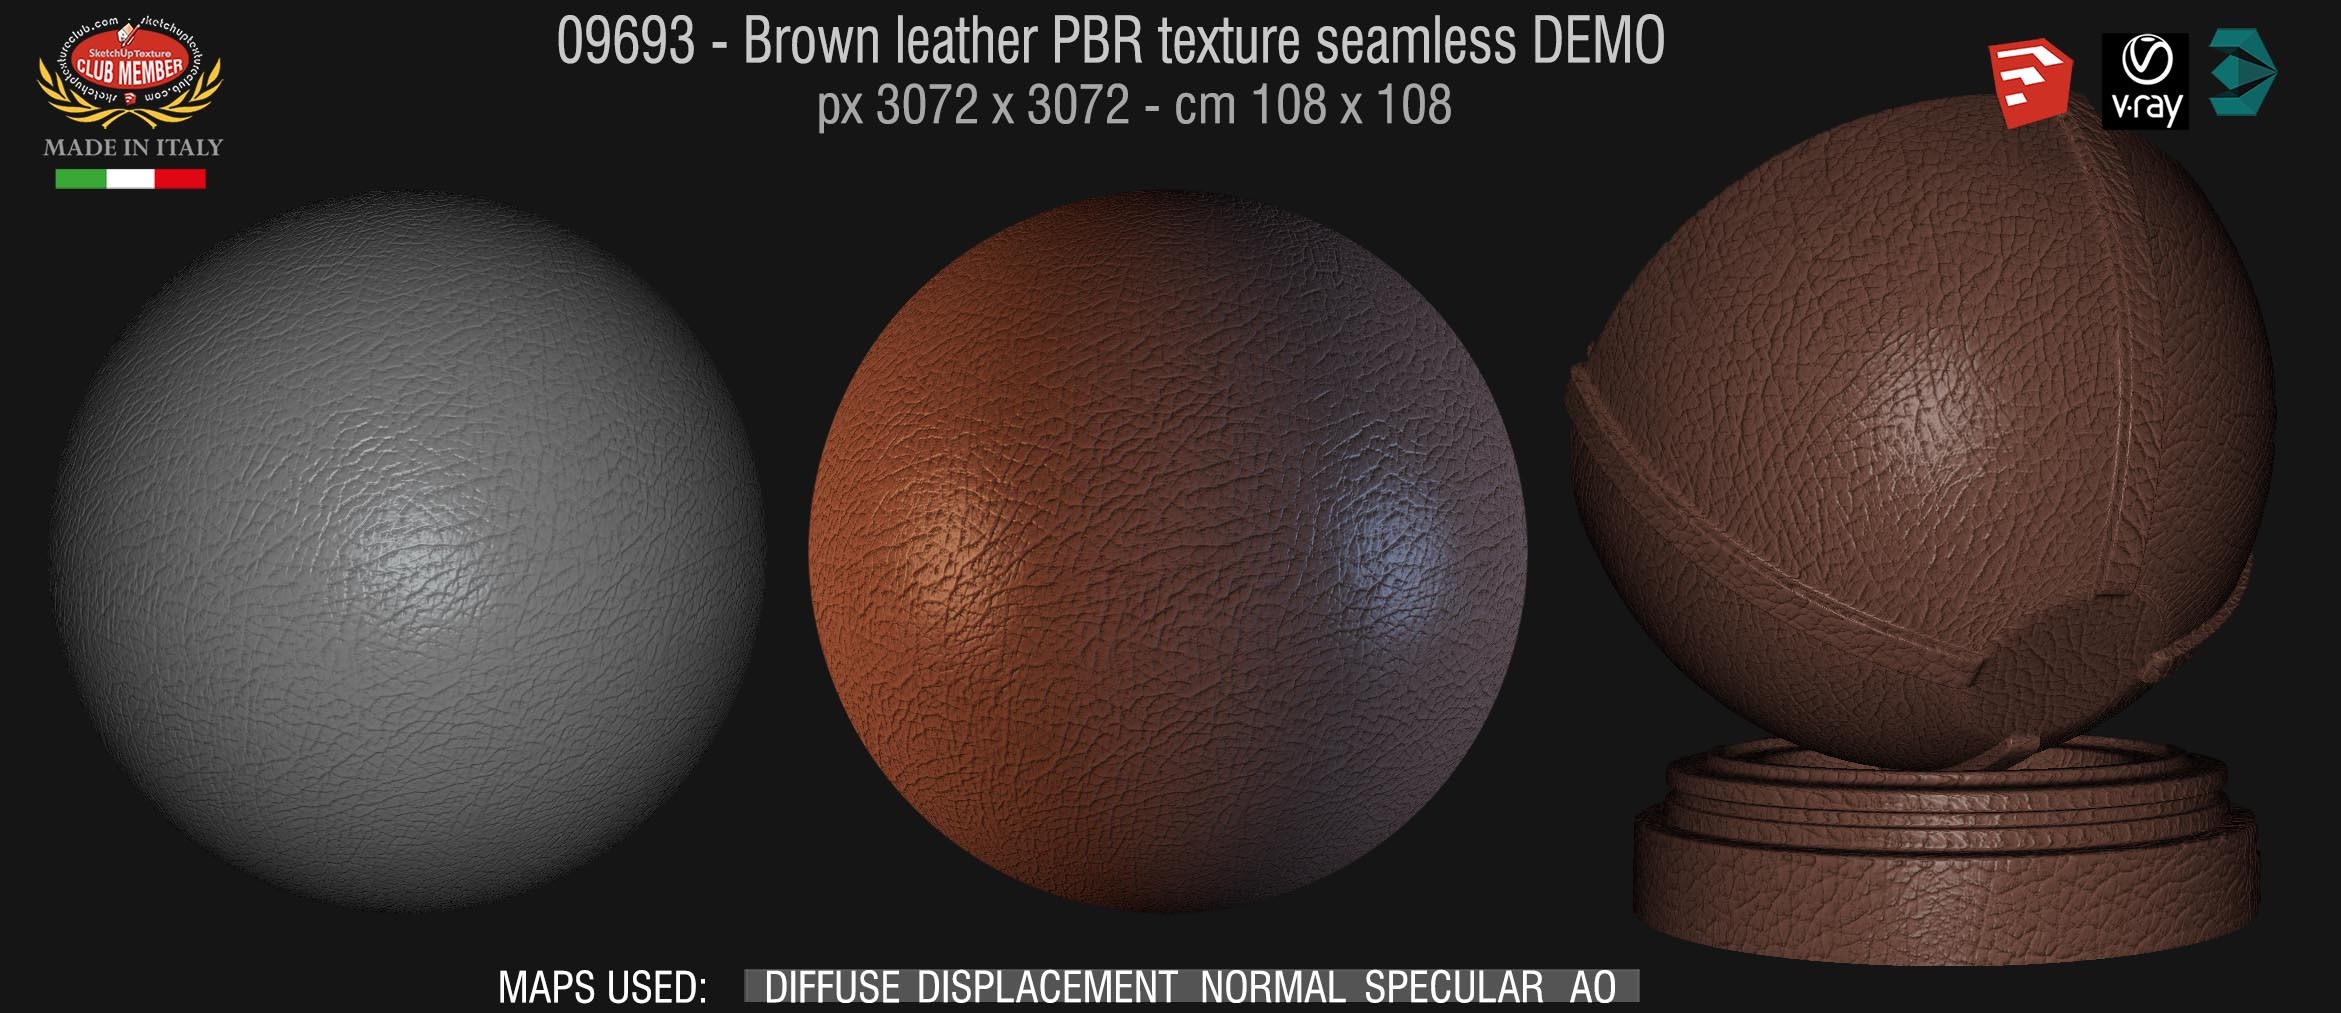 09693 Brown leather PBR texture seamless DEMO